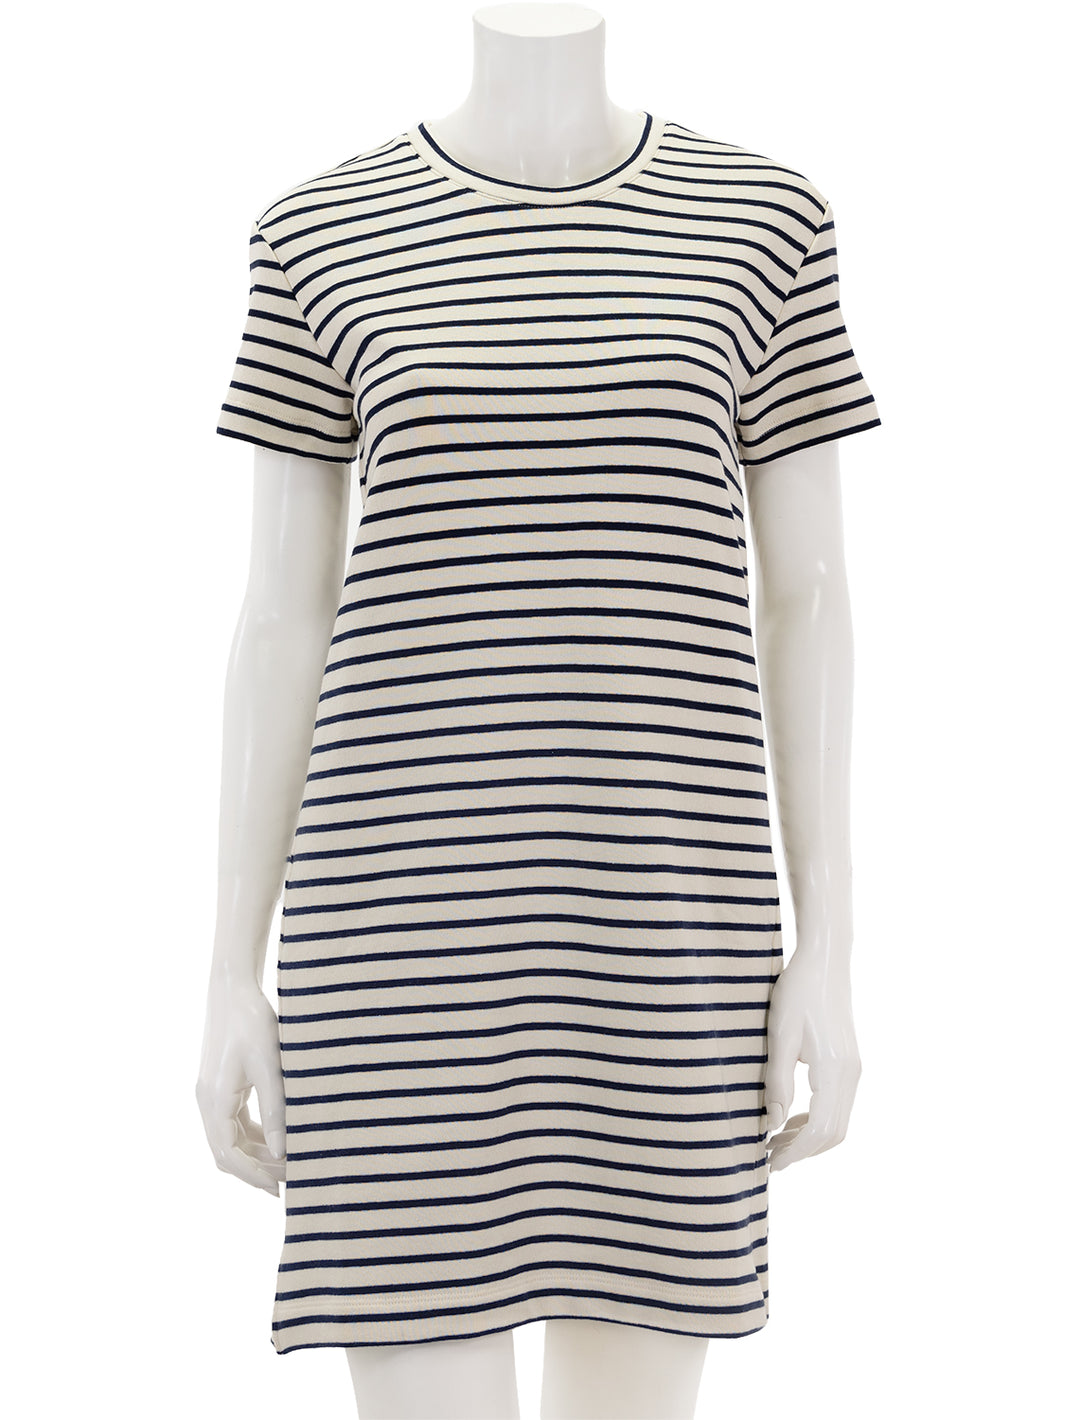 Front view of Splendid's whitney stripe dress in navy and white.